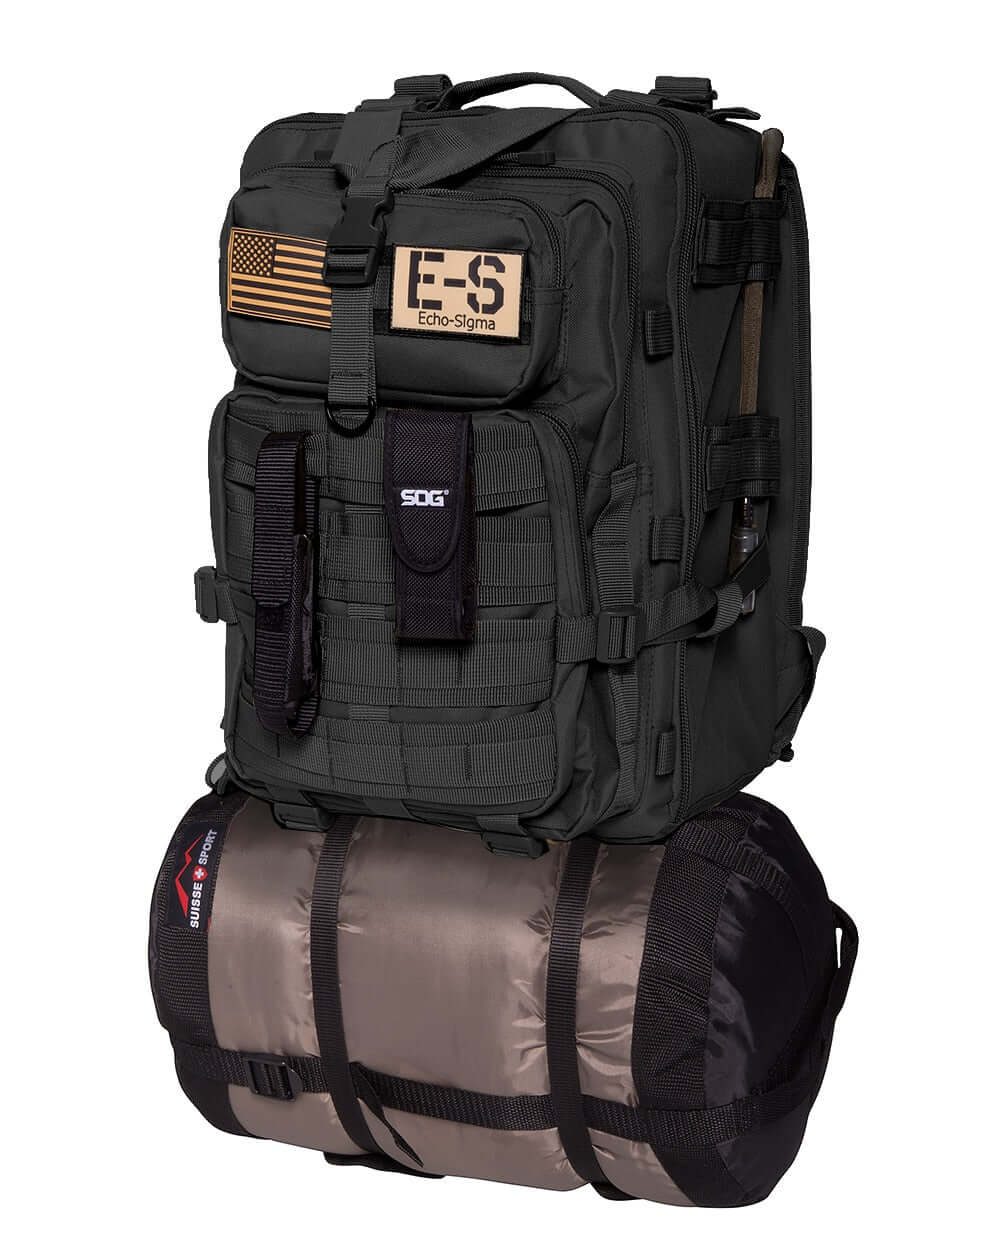 Bug Out Bag List for Baby